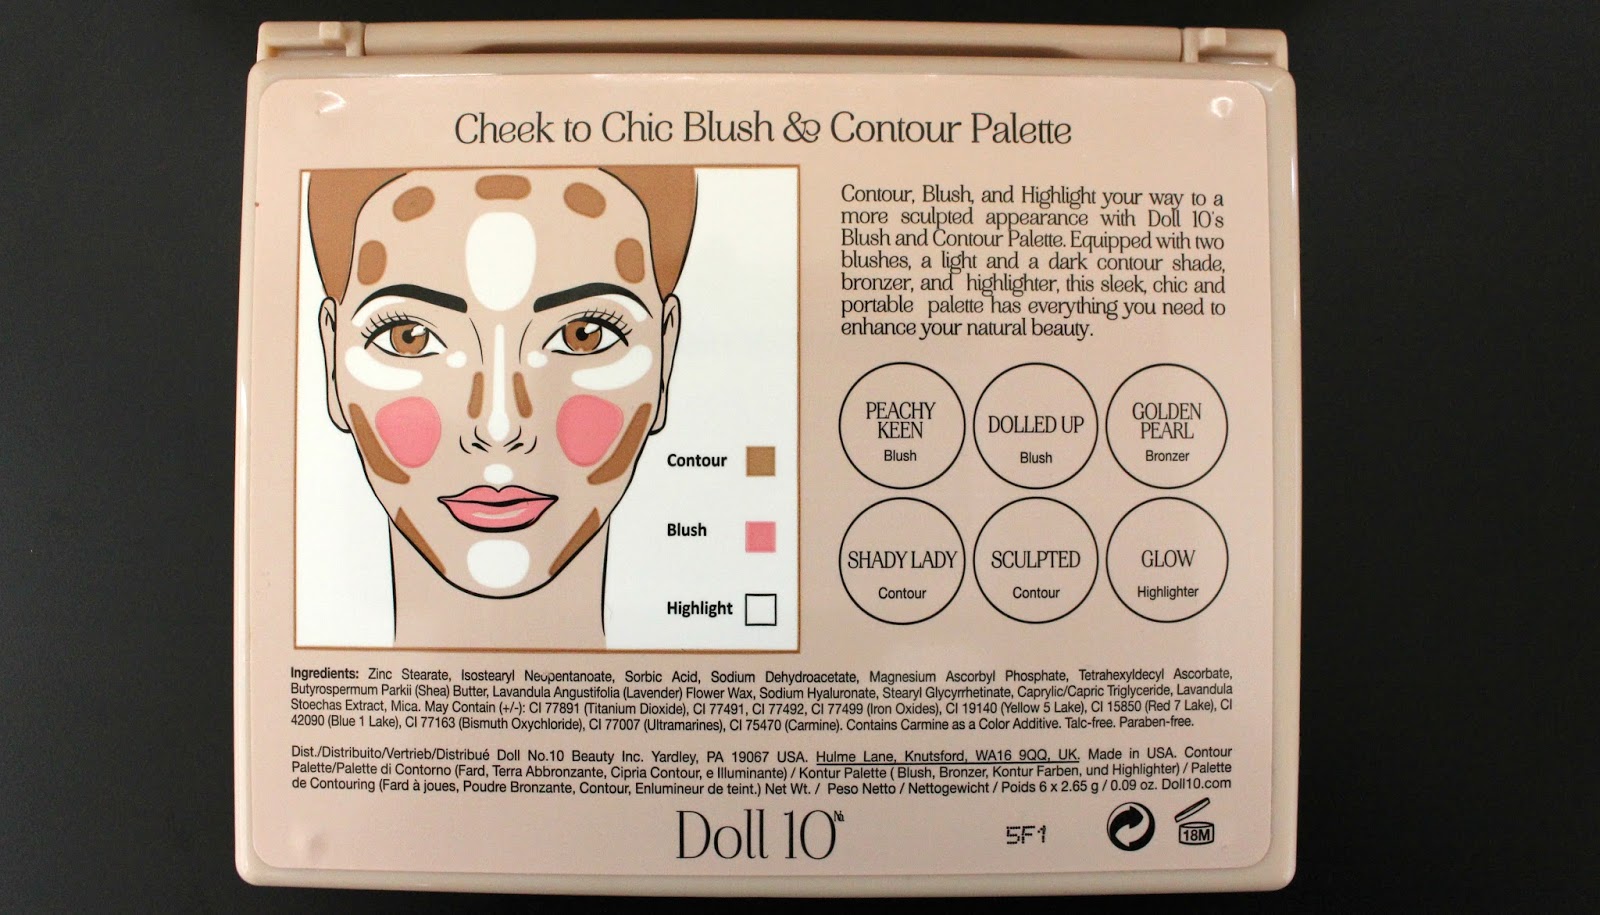 Doll 10 Cheek To Chic Blush & Contour Palette Review | A Very Sweet Blog